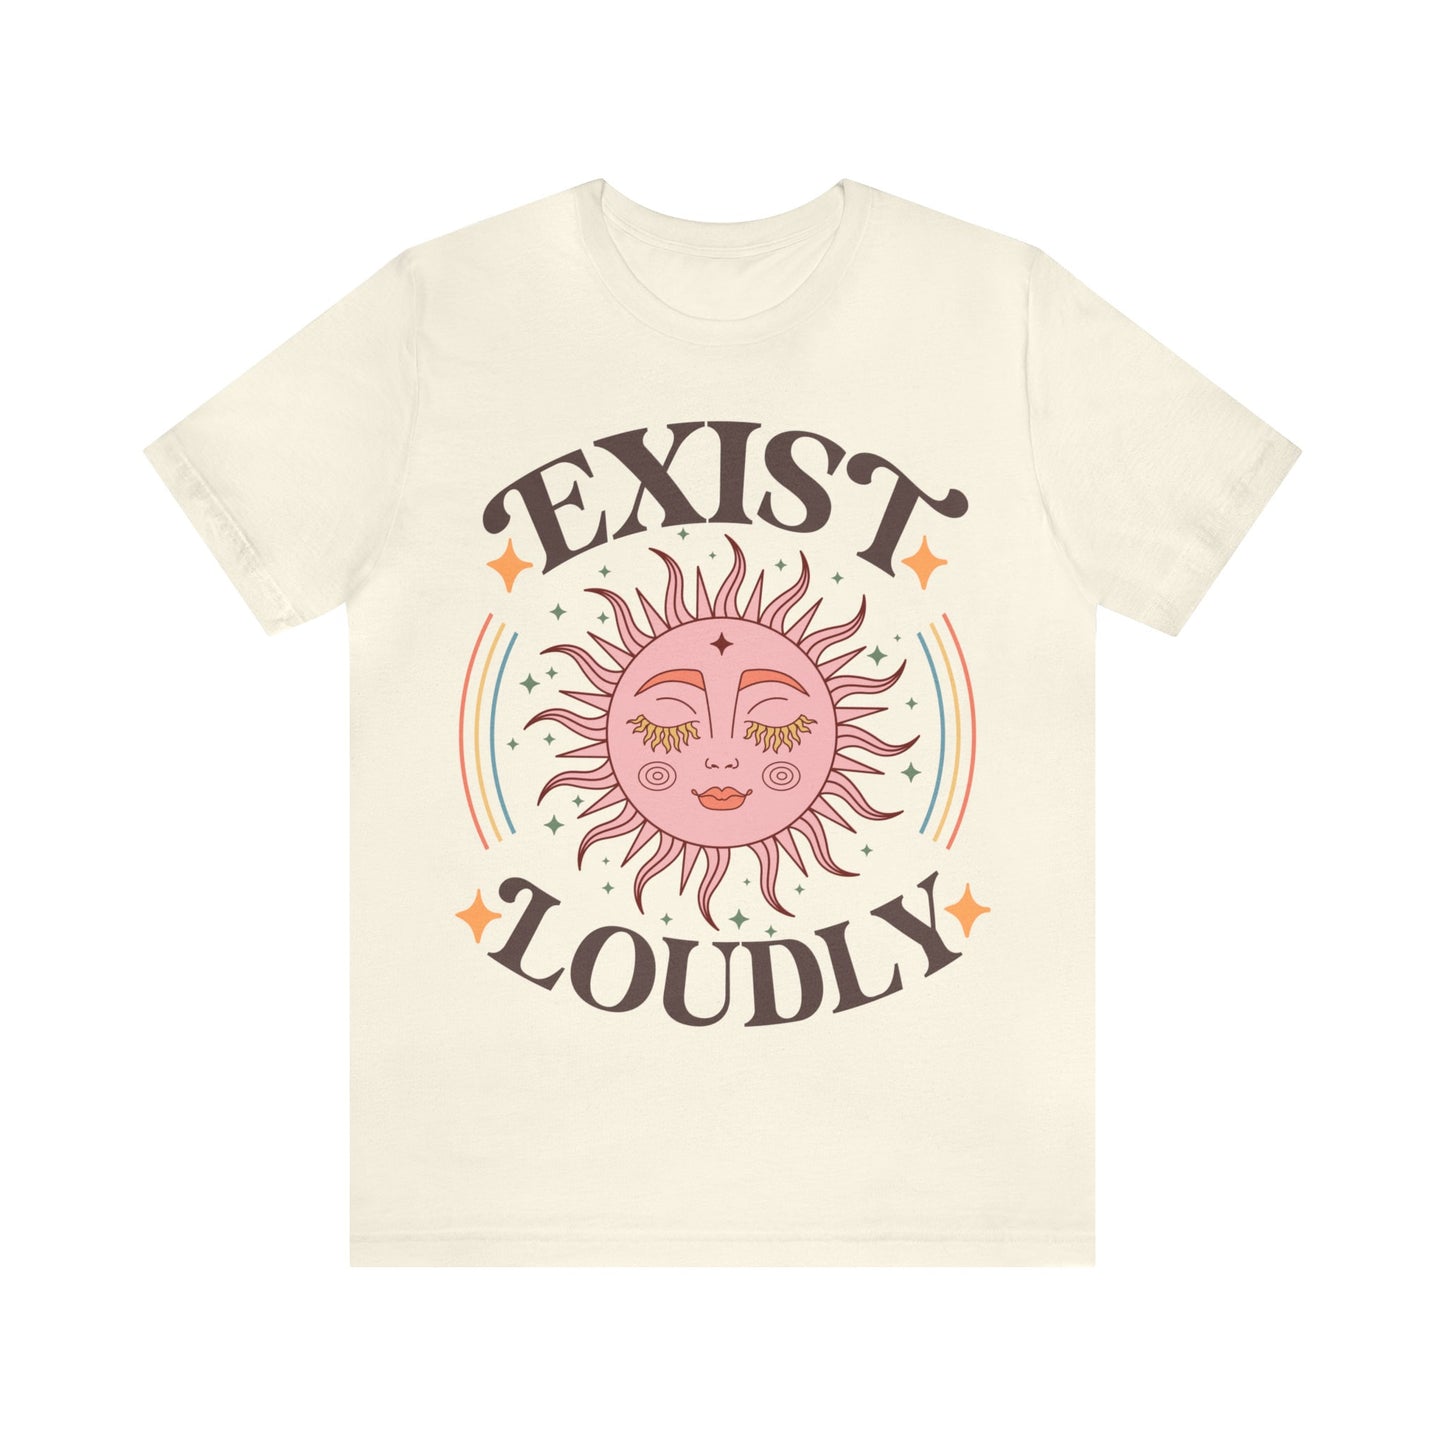 Exist loudly shirt